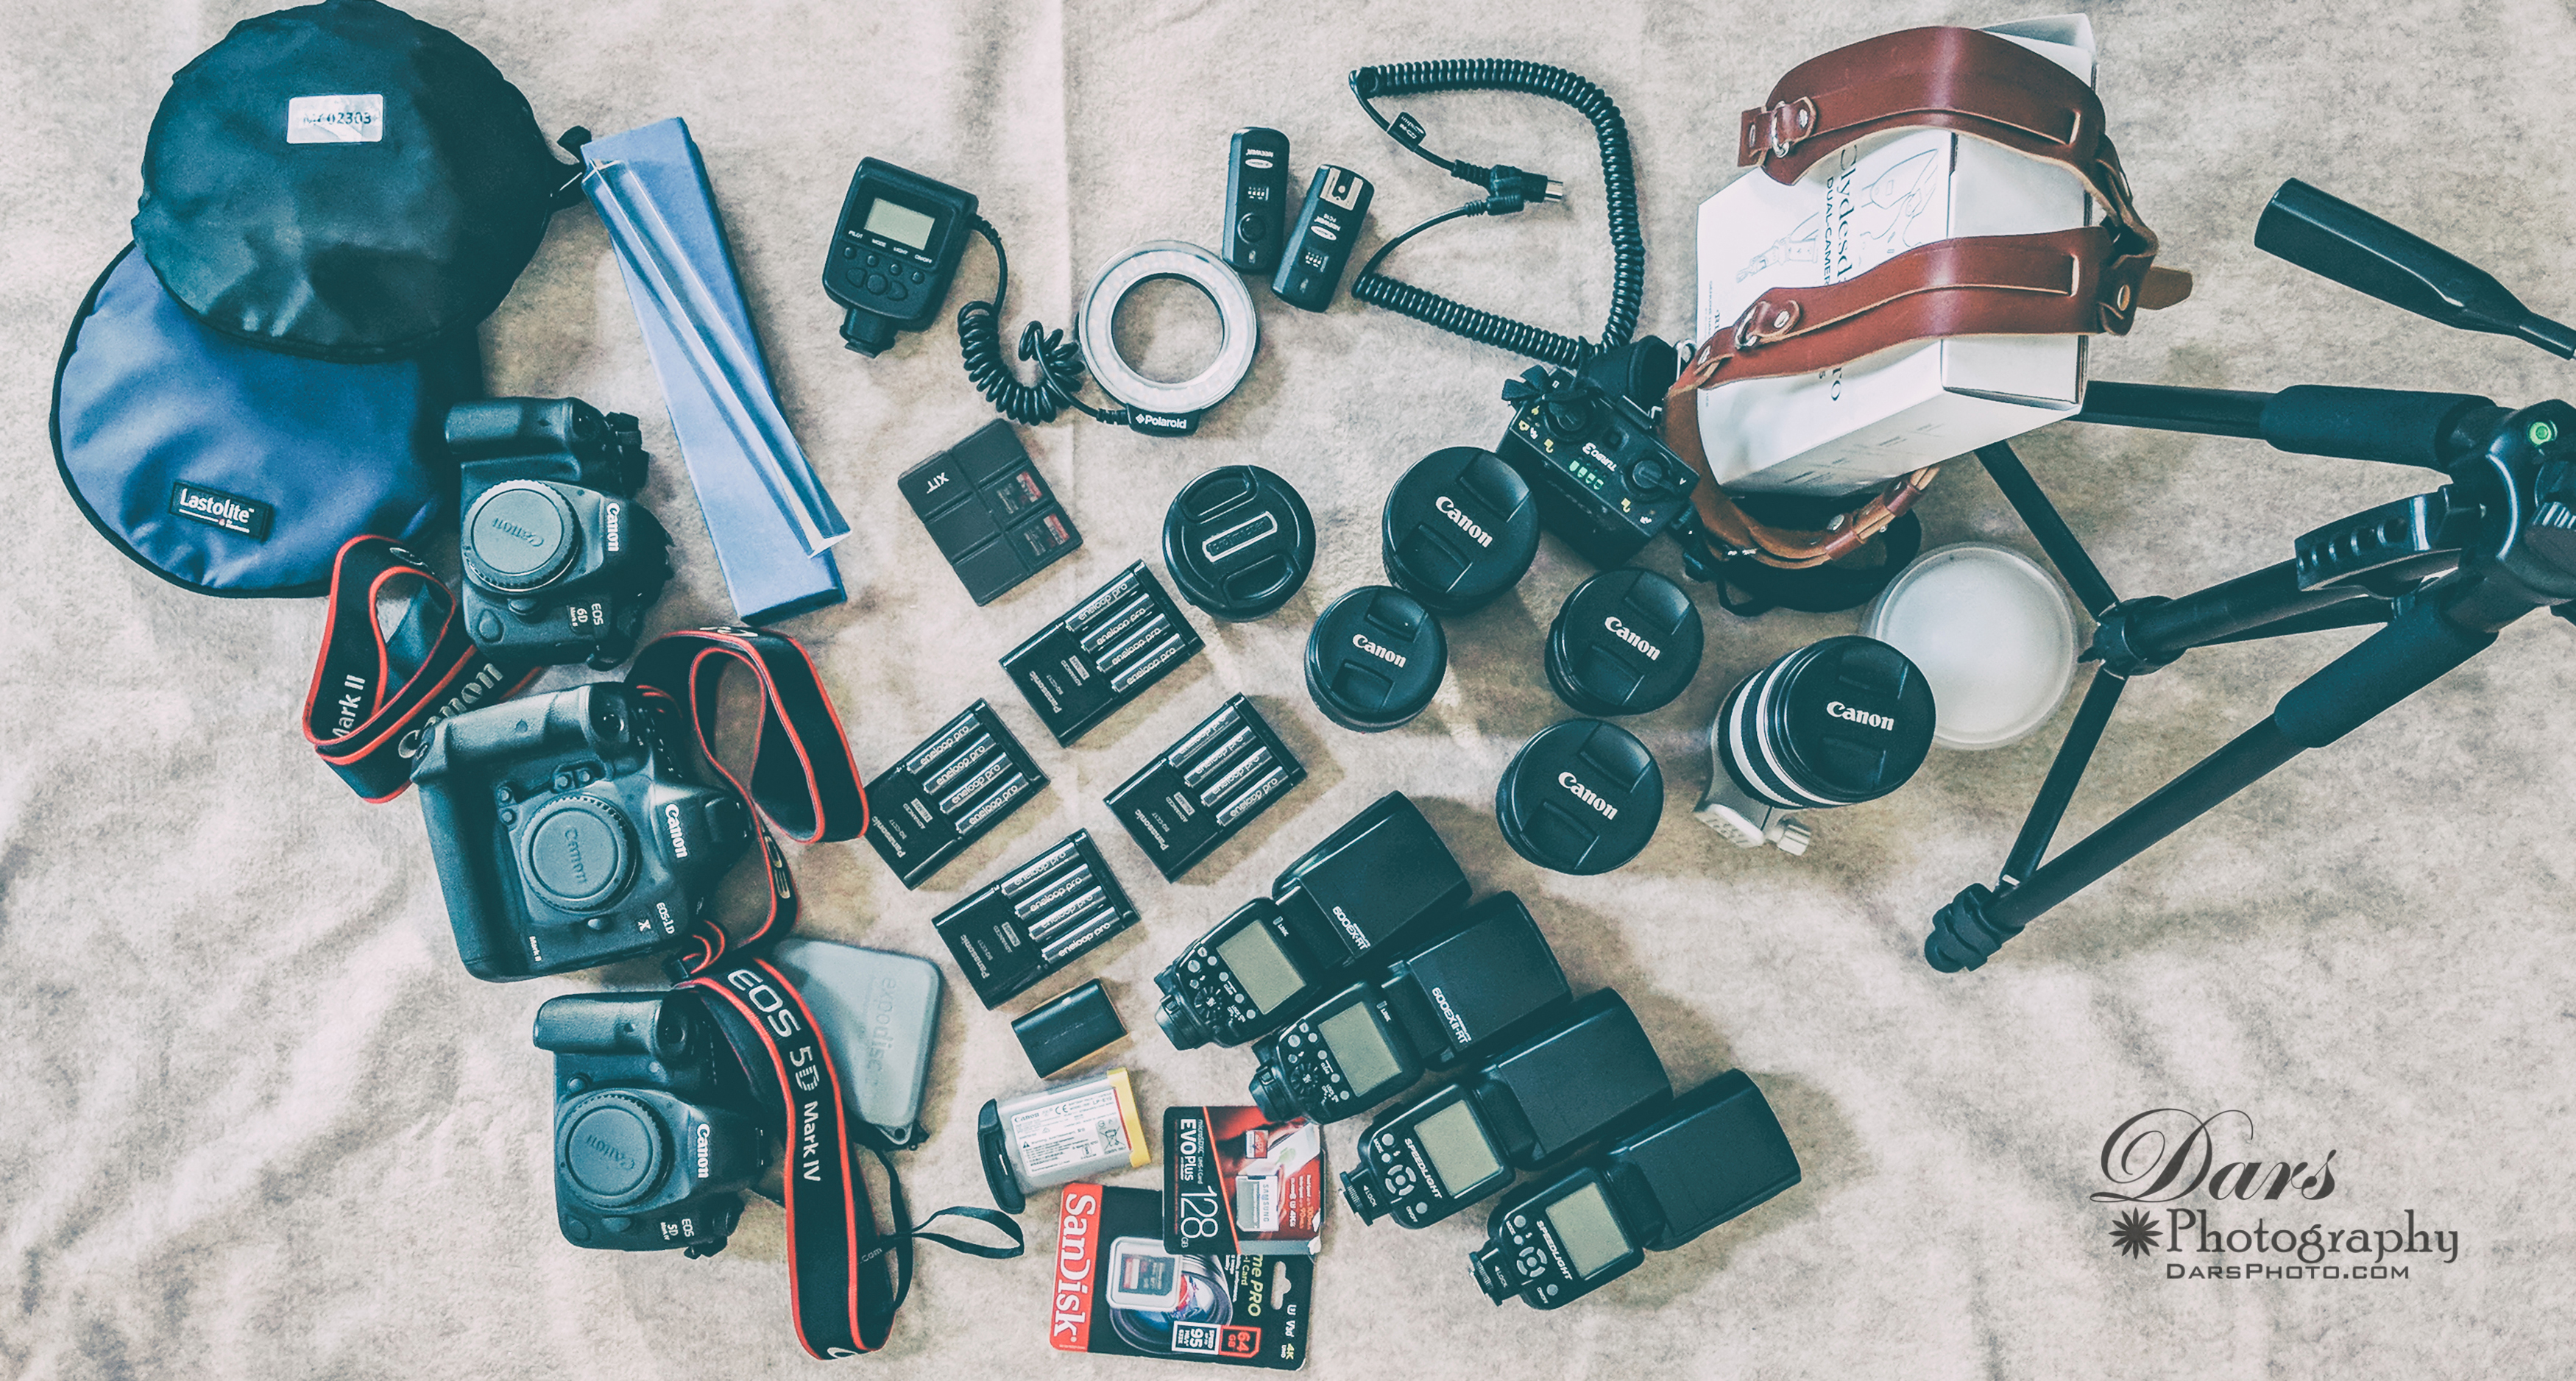 What's In My Camera Bag